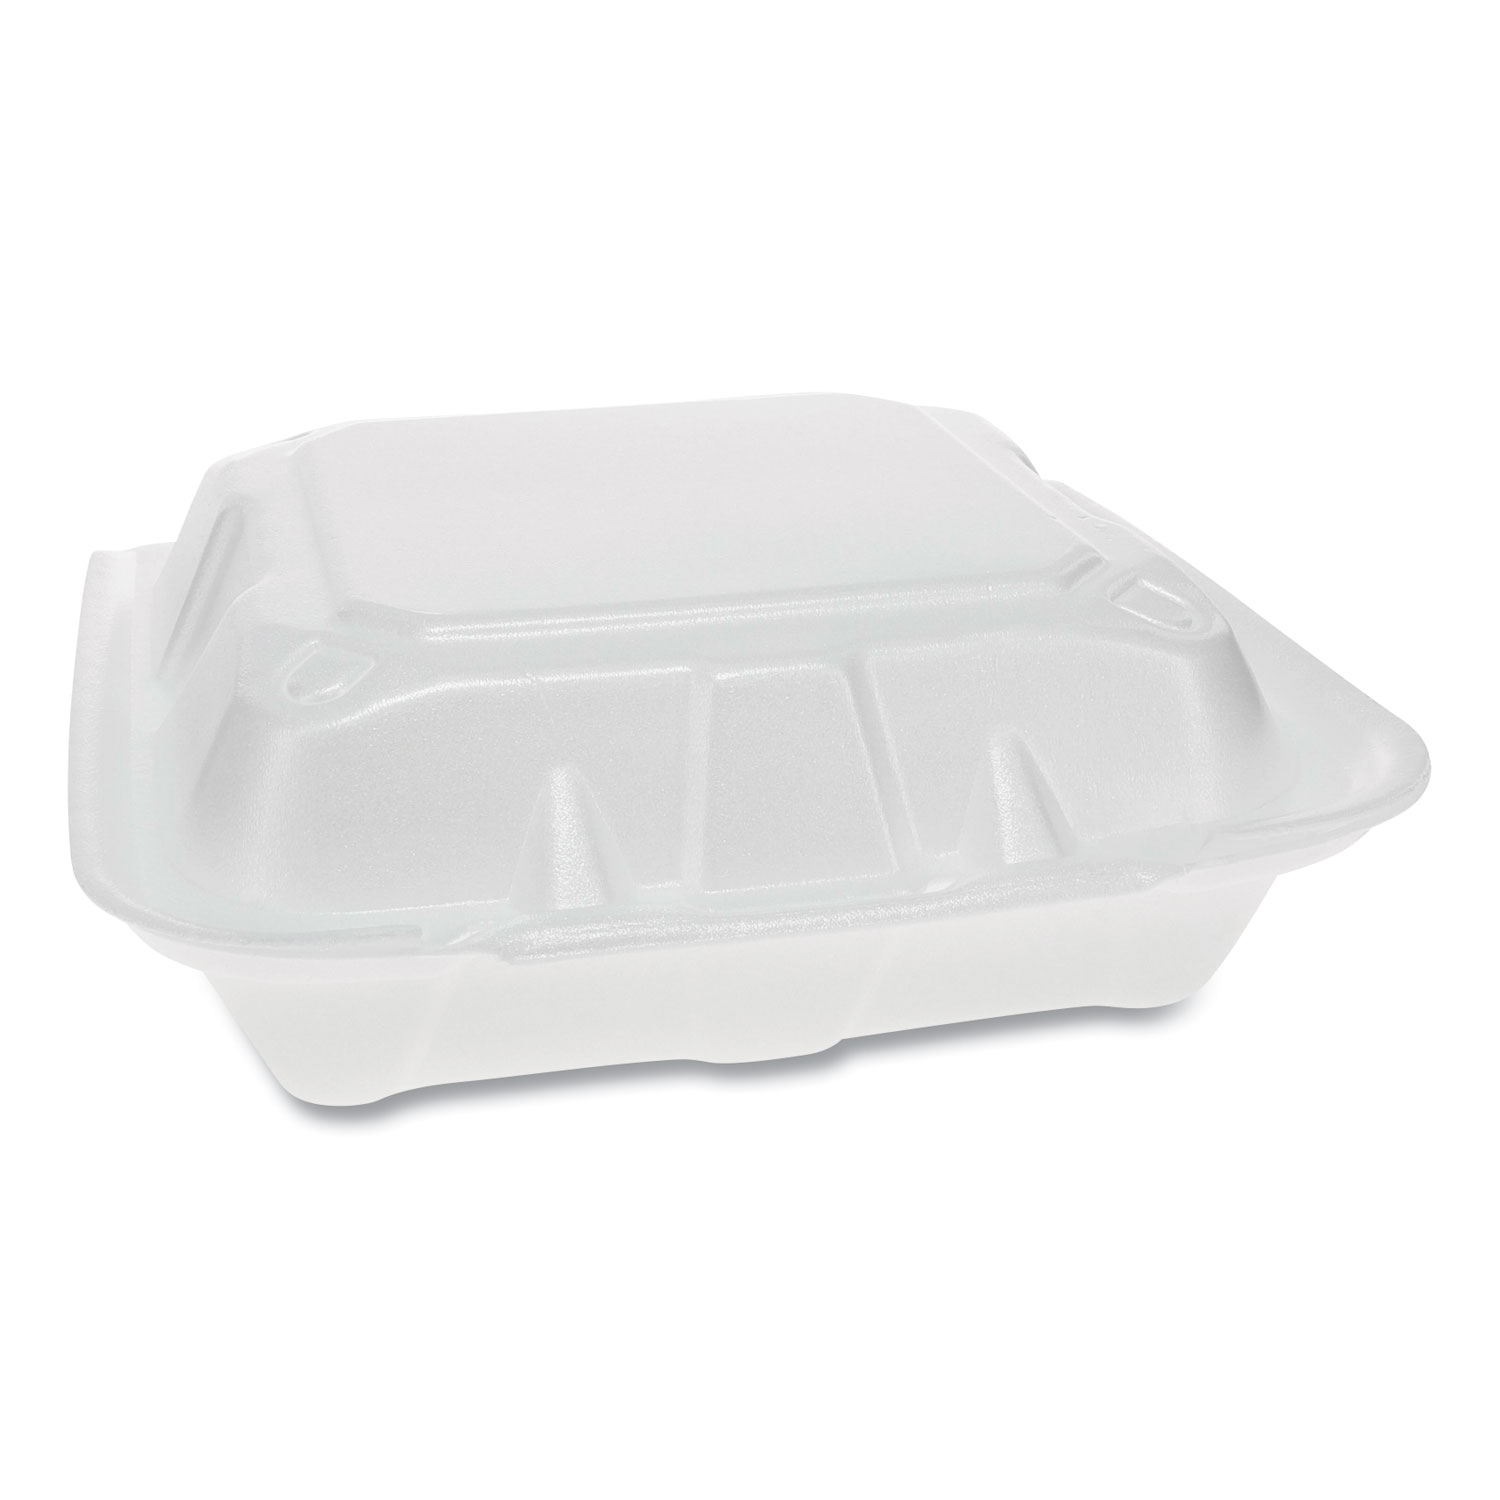  Pactiv YTD18803ECON Foam Hinged Lid Containers, Dual Tab Lock Economy, 8.42 x 8.15 x 3, 3-Compartment, White, 150/Carton (PCTYTD18803ECON) 